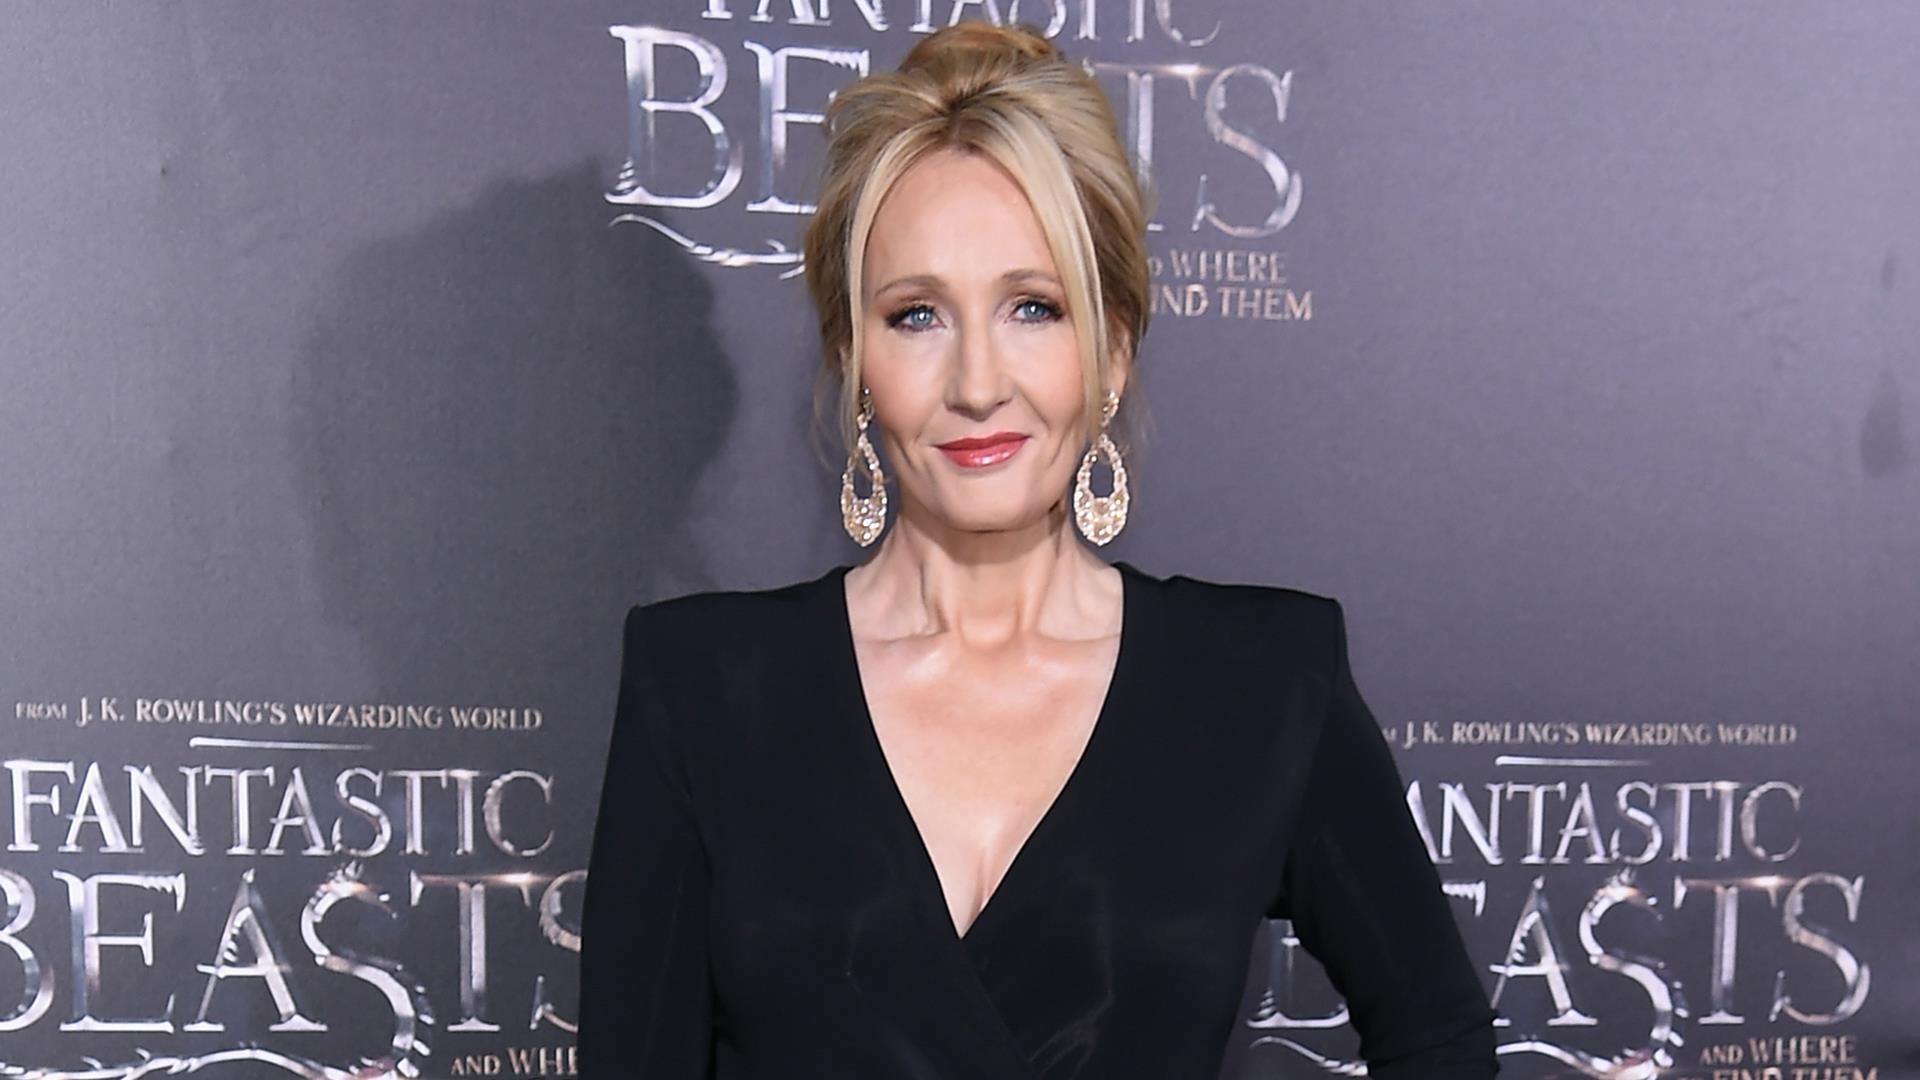 Ouch! Harry Potter author J.K. Rowling burns her critics on Twitter